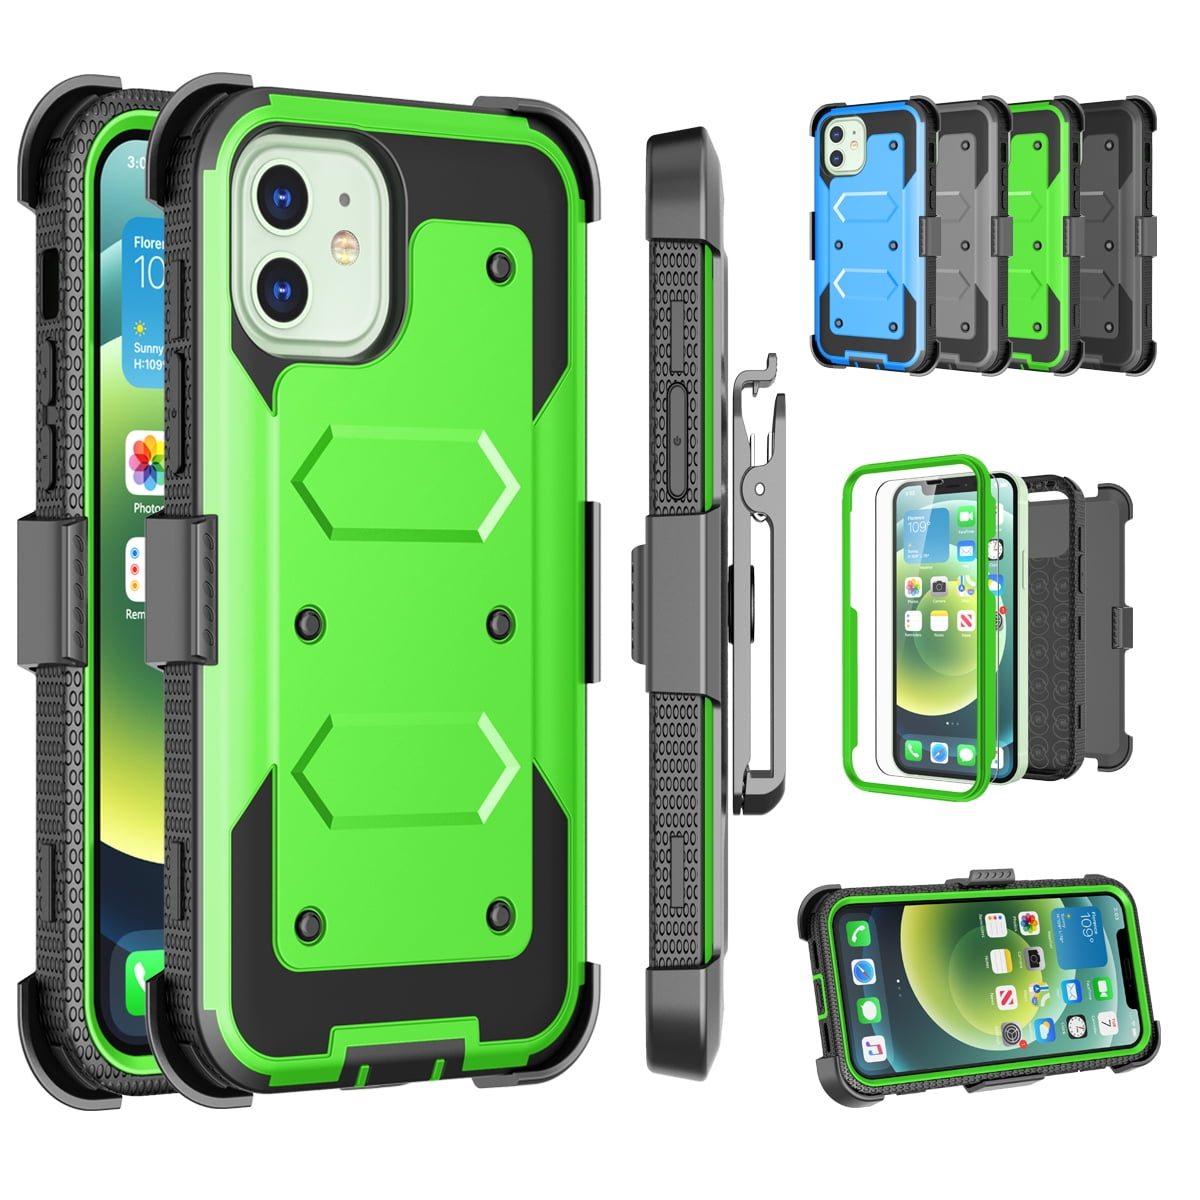 Apple Iphone 12 Pro Max Case 6 7 Phone 12 Pro Max Clip Belt Holster Takfox Shockproof Swivel Defender Heavy Duty Armor Protective Cases 2 Pcs Screen Protector With Kickstand Rugged Cover